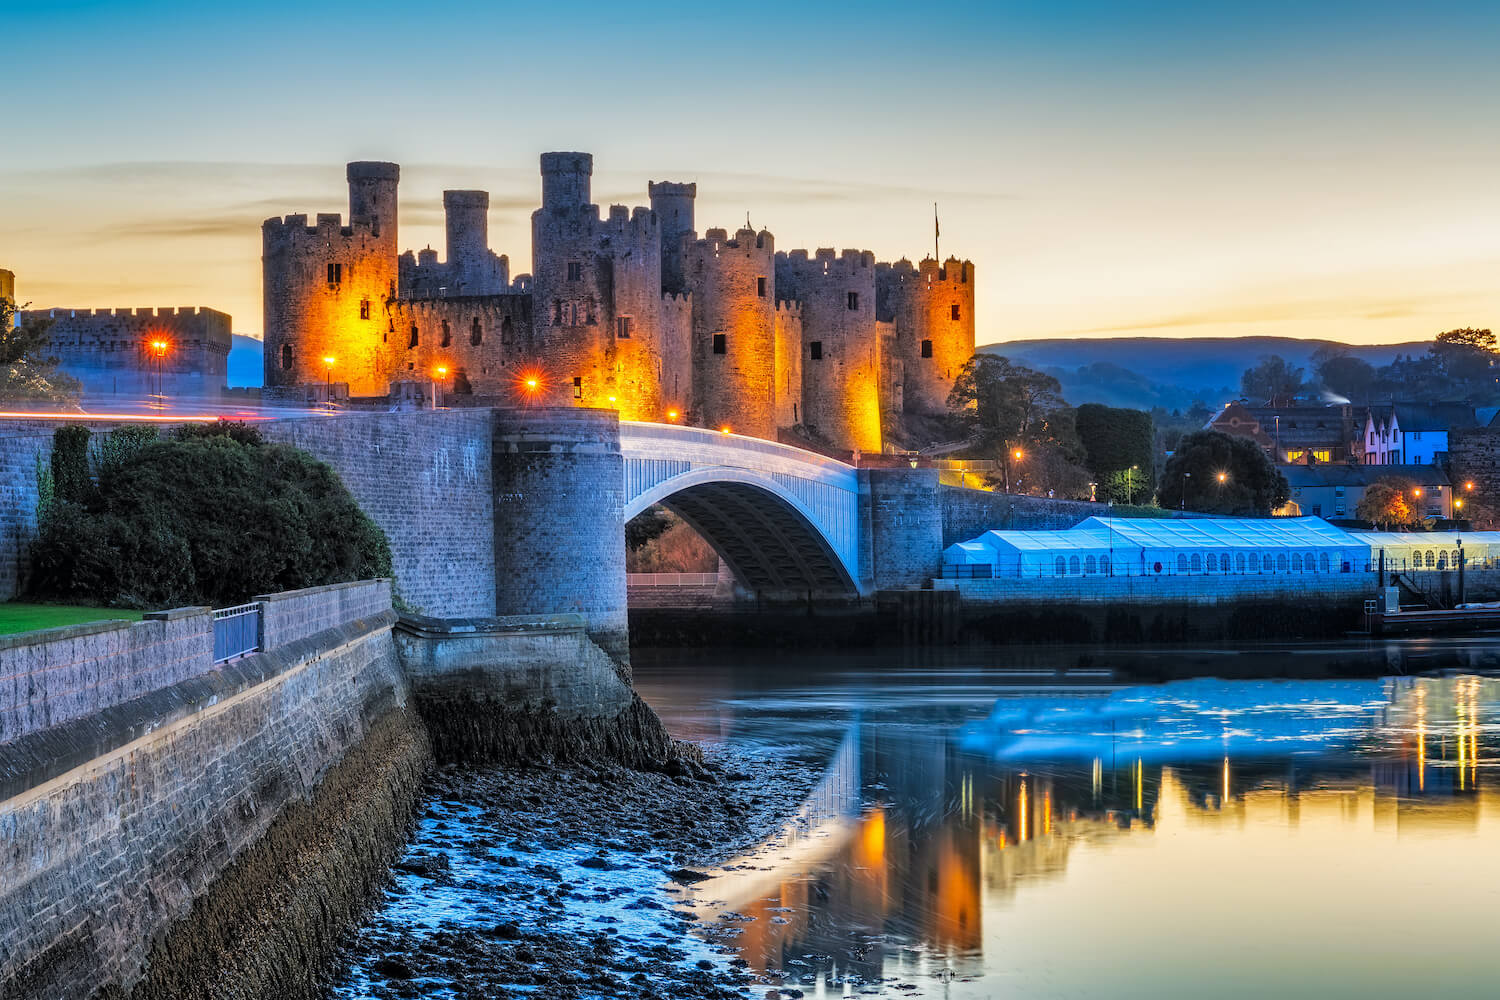 Conwy castle in Wales